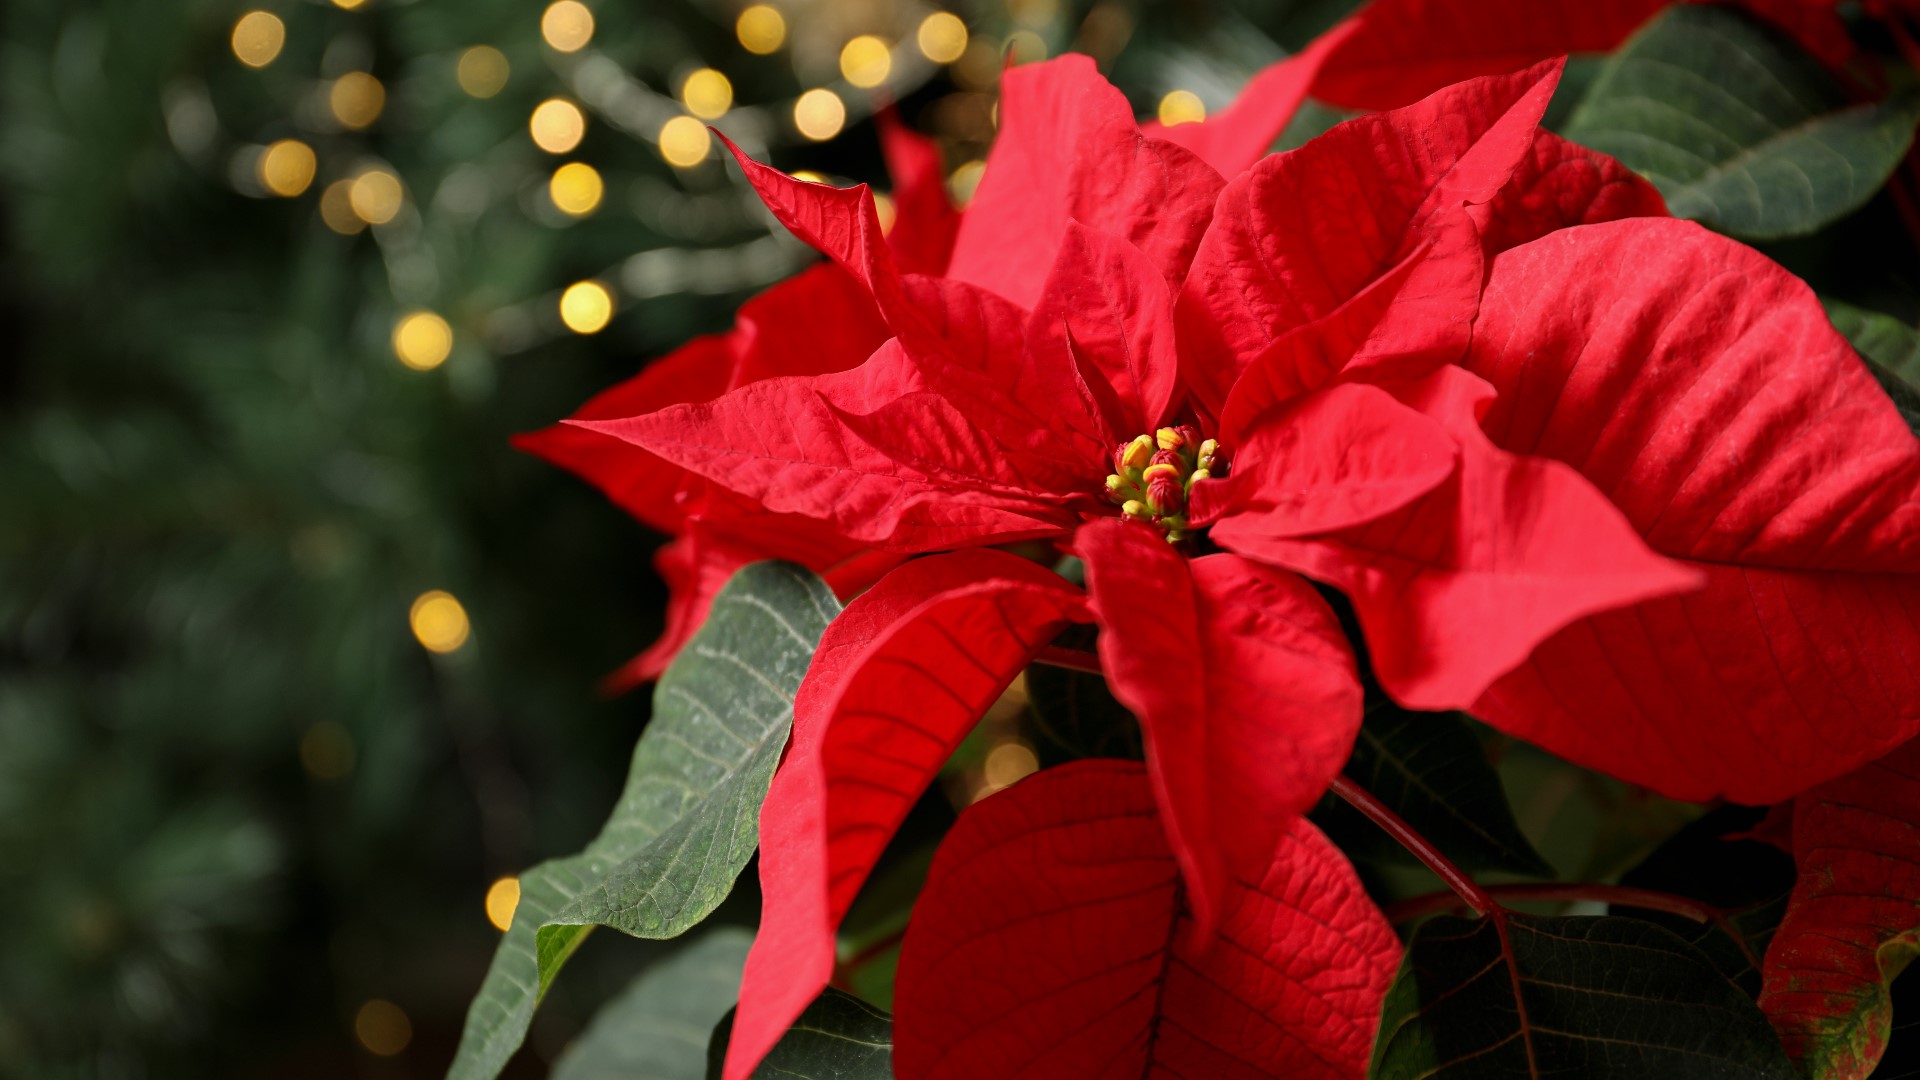 Remember: Poinsettias are mildly toxic to cats and dogs if eaten, so keep them away from your fur babies.